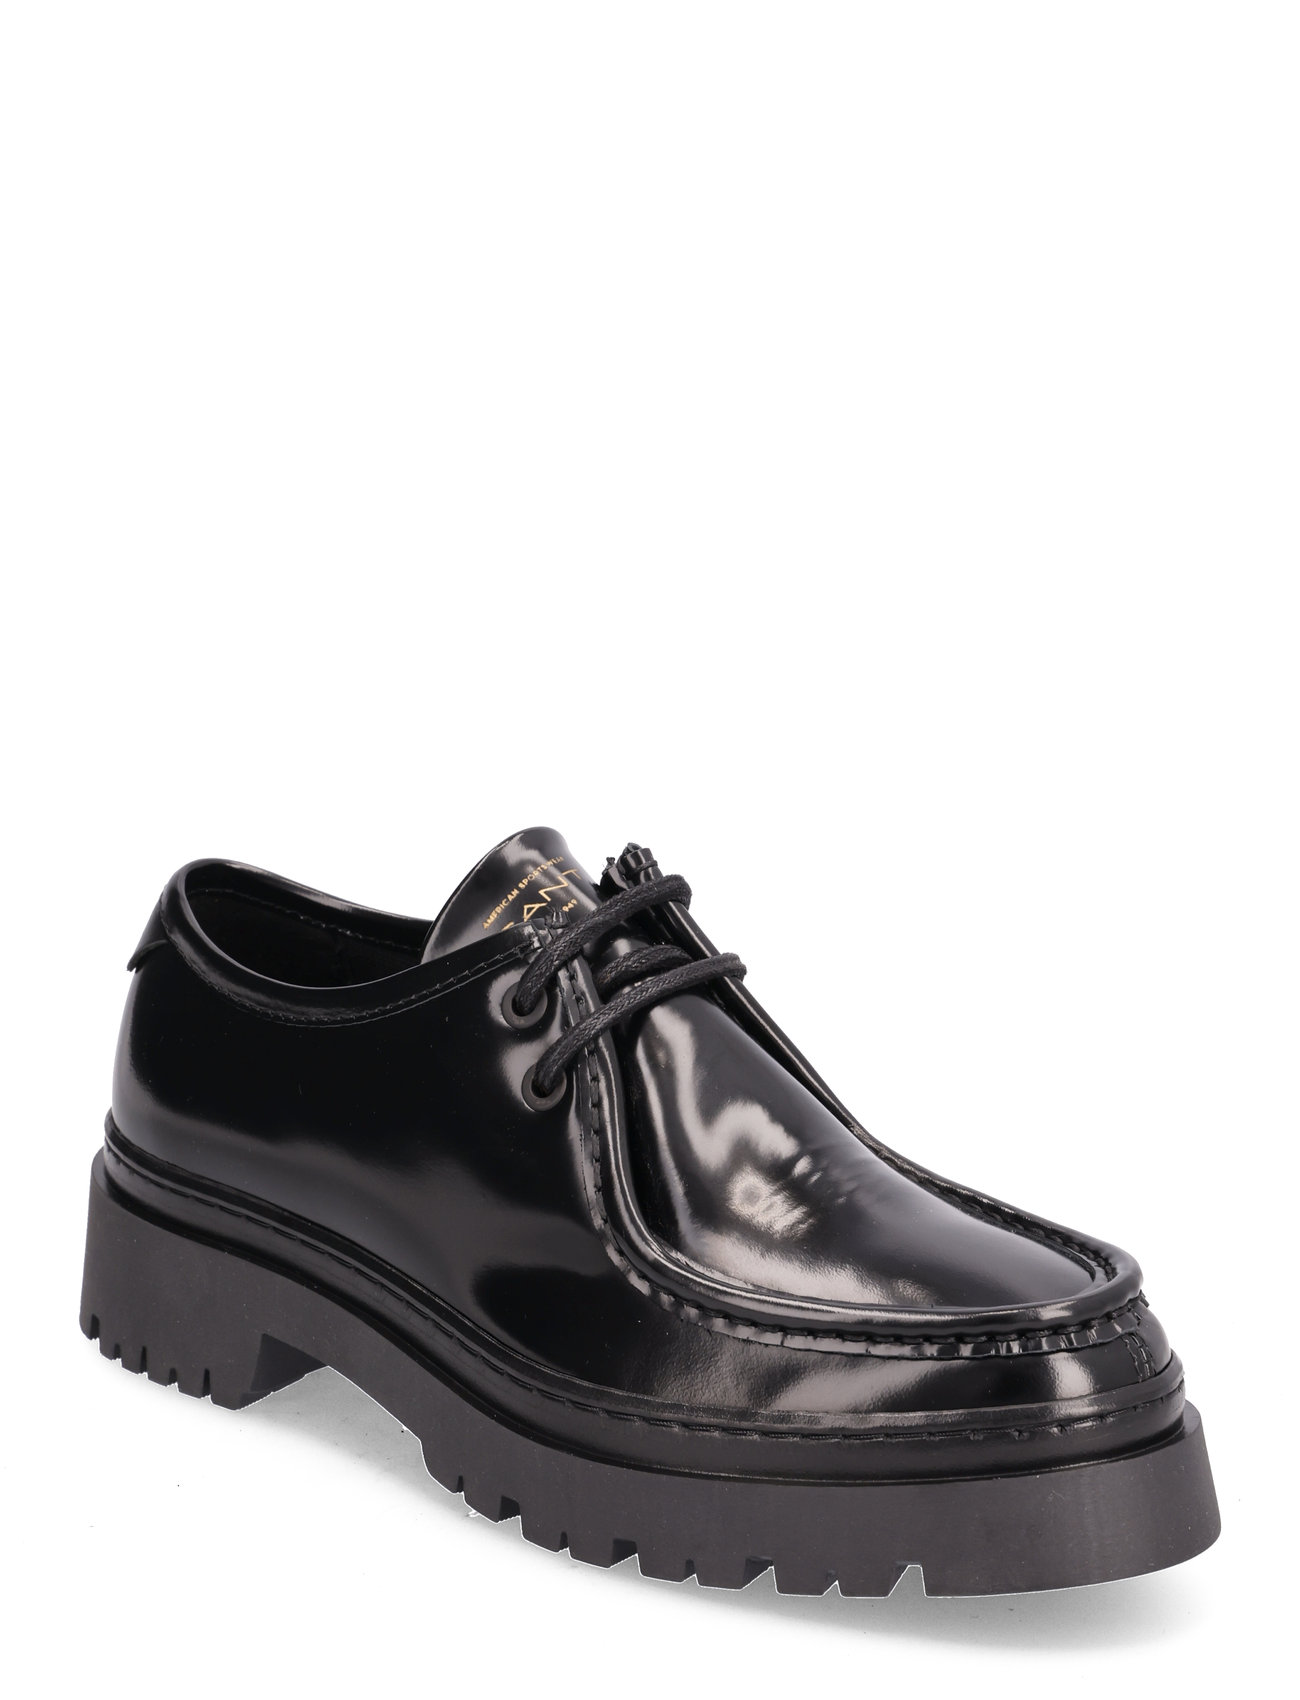 GANT Aligrey Low Lace Shoe - Loafers - Boozt.com